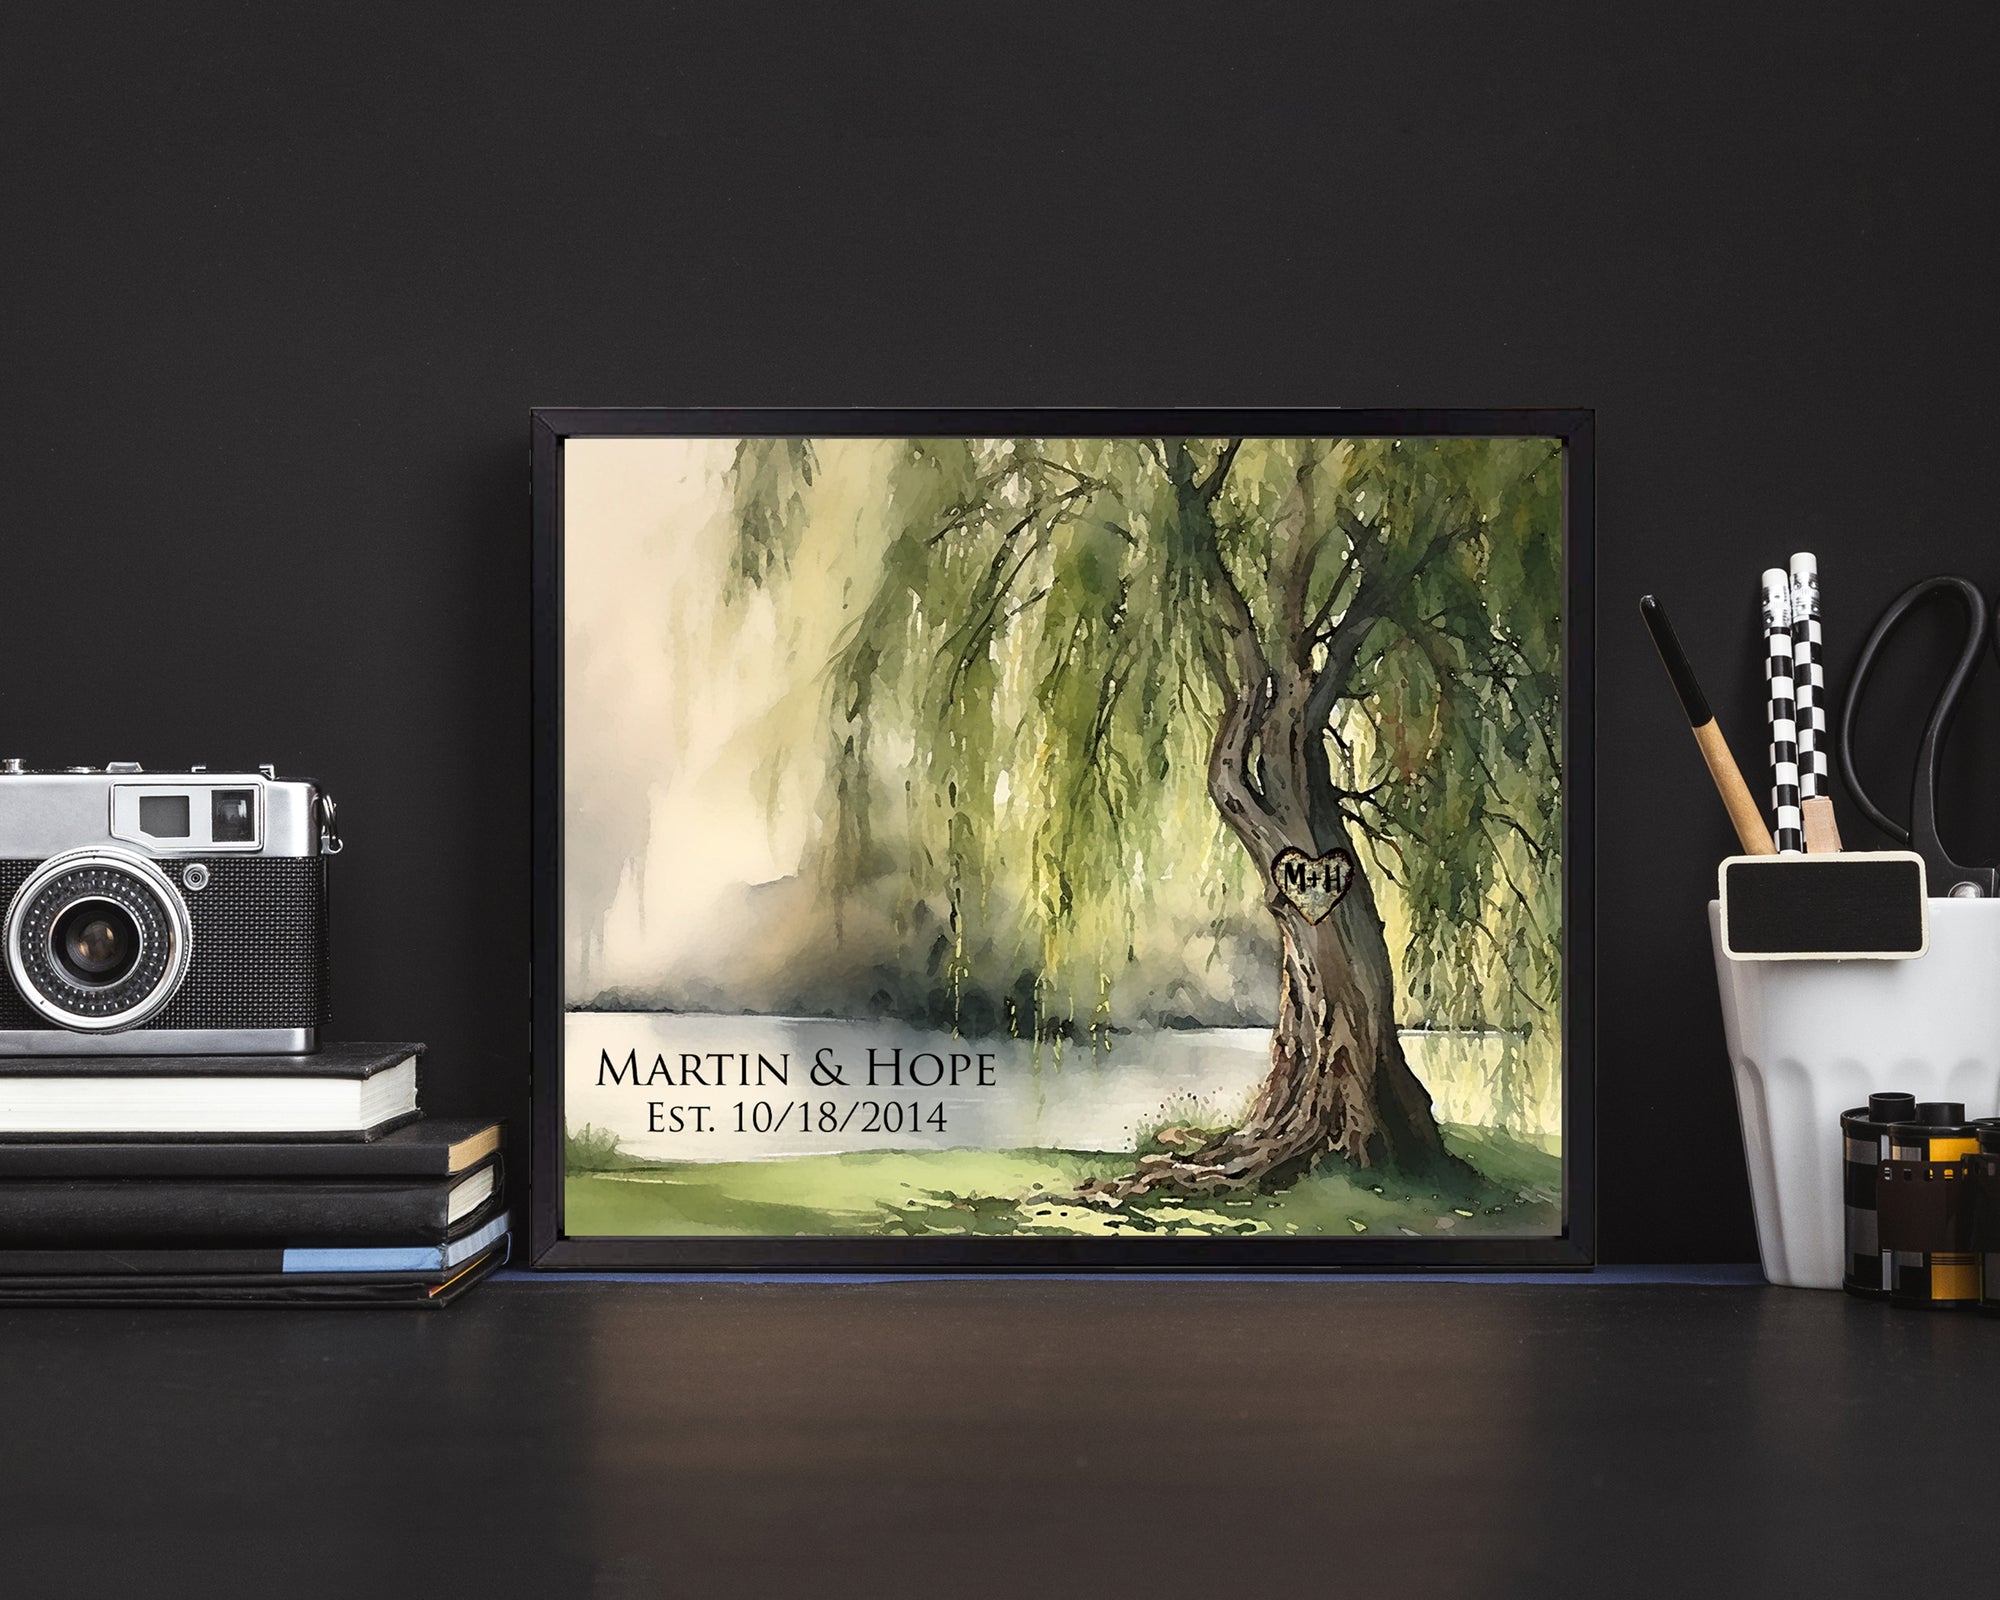 Celebrate your 9th wedding anniversary with this beautiful personalized picture frame featuring a willow tree print.